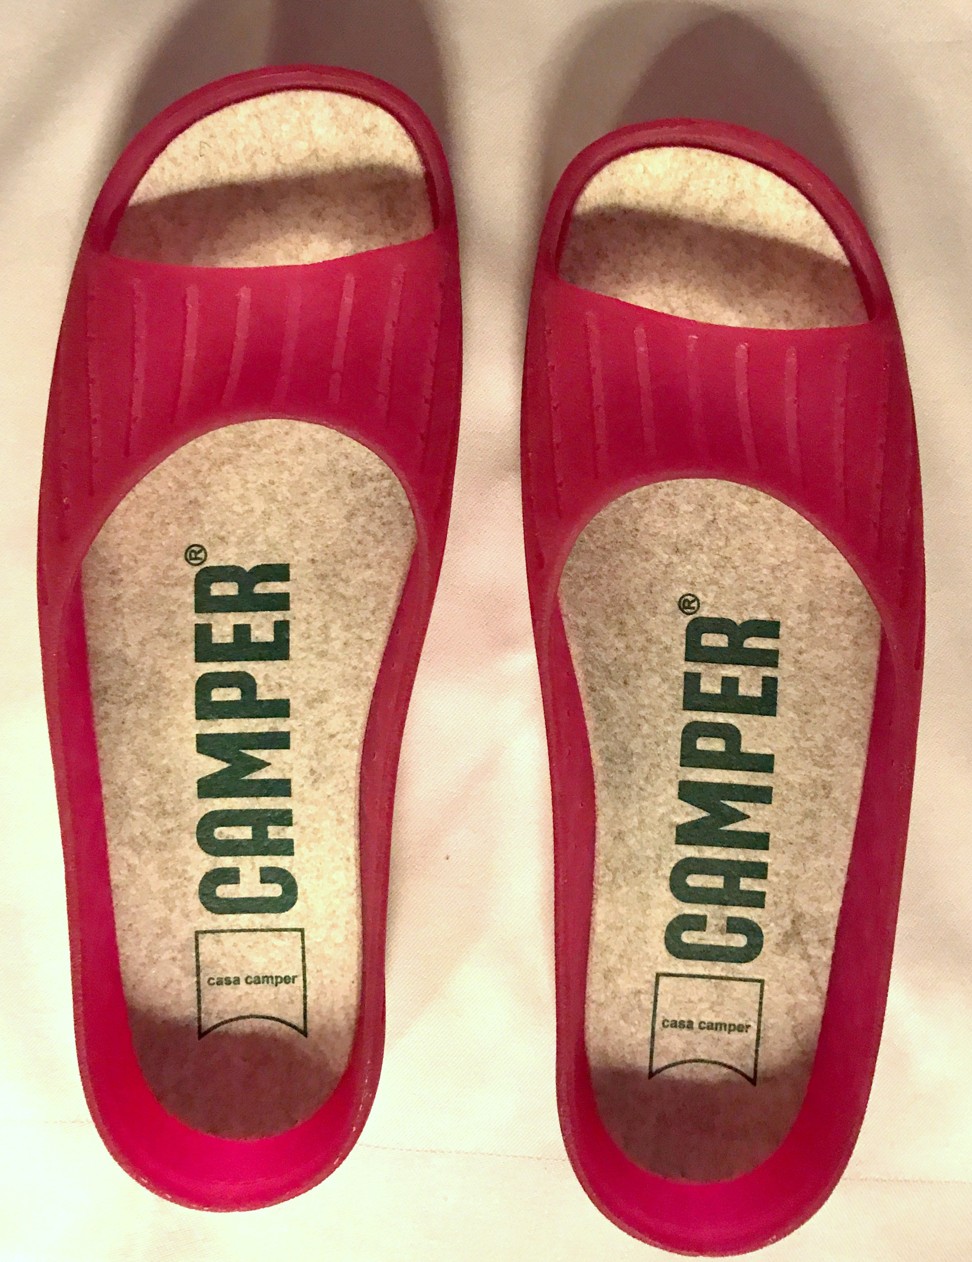 campers slippers